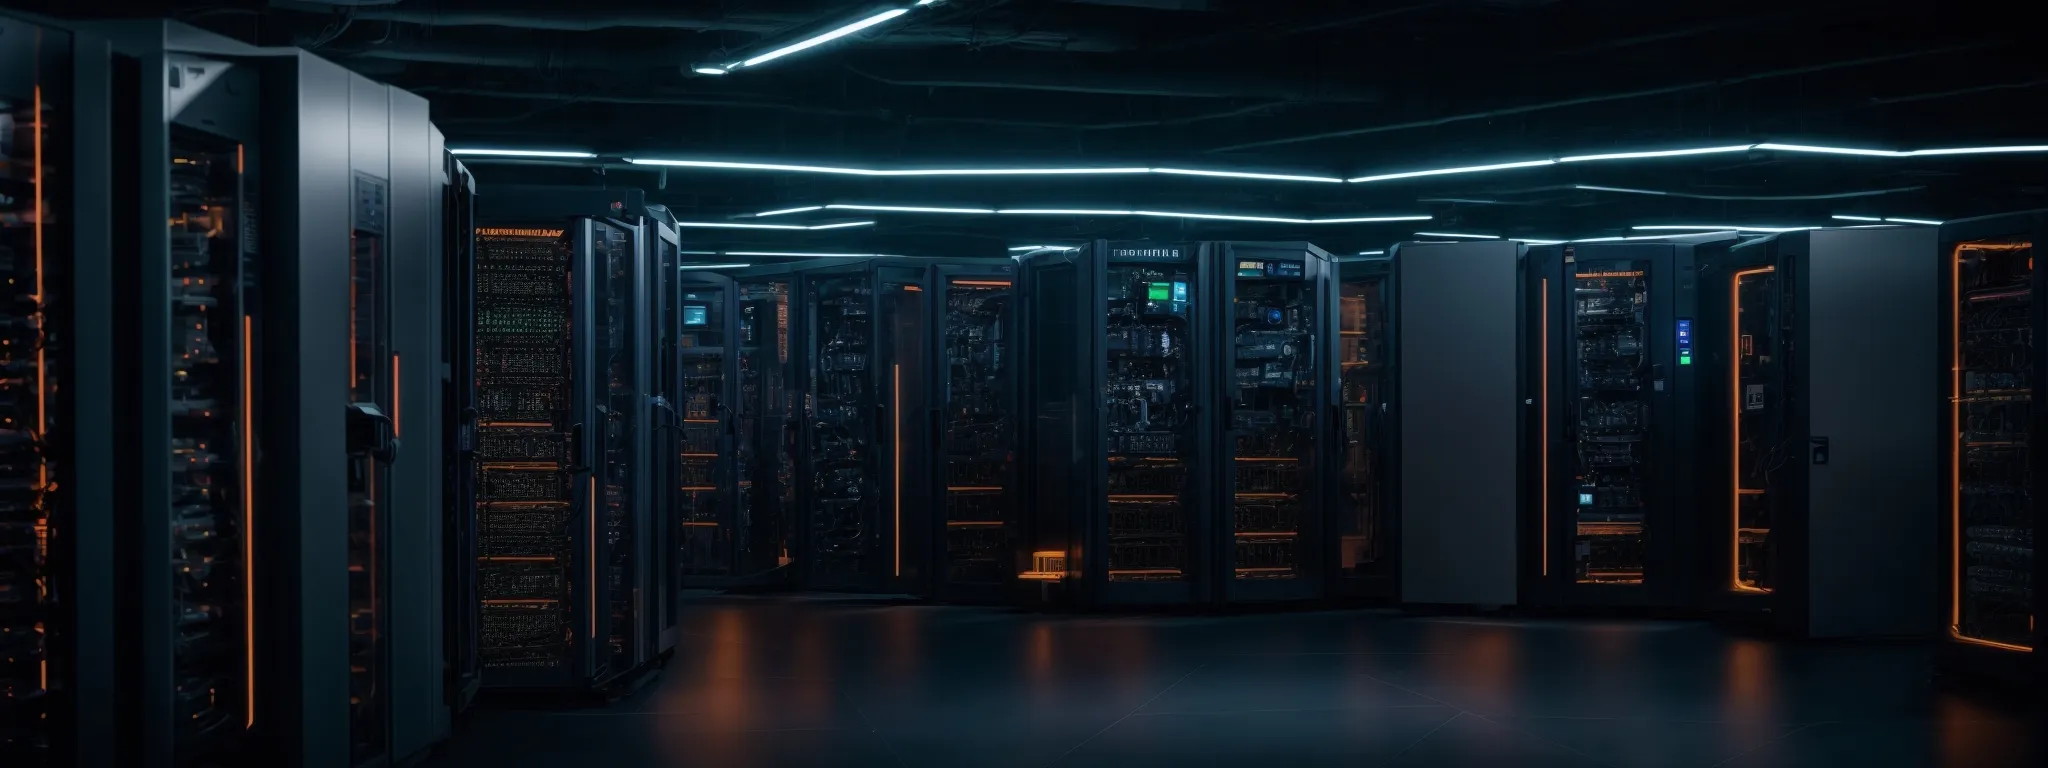 a secure, high-tech server room with glowing lights indicating active data protection mechanisms.